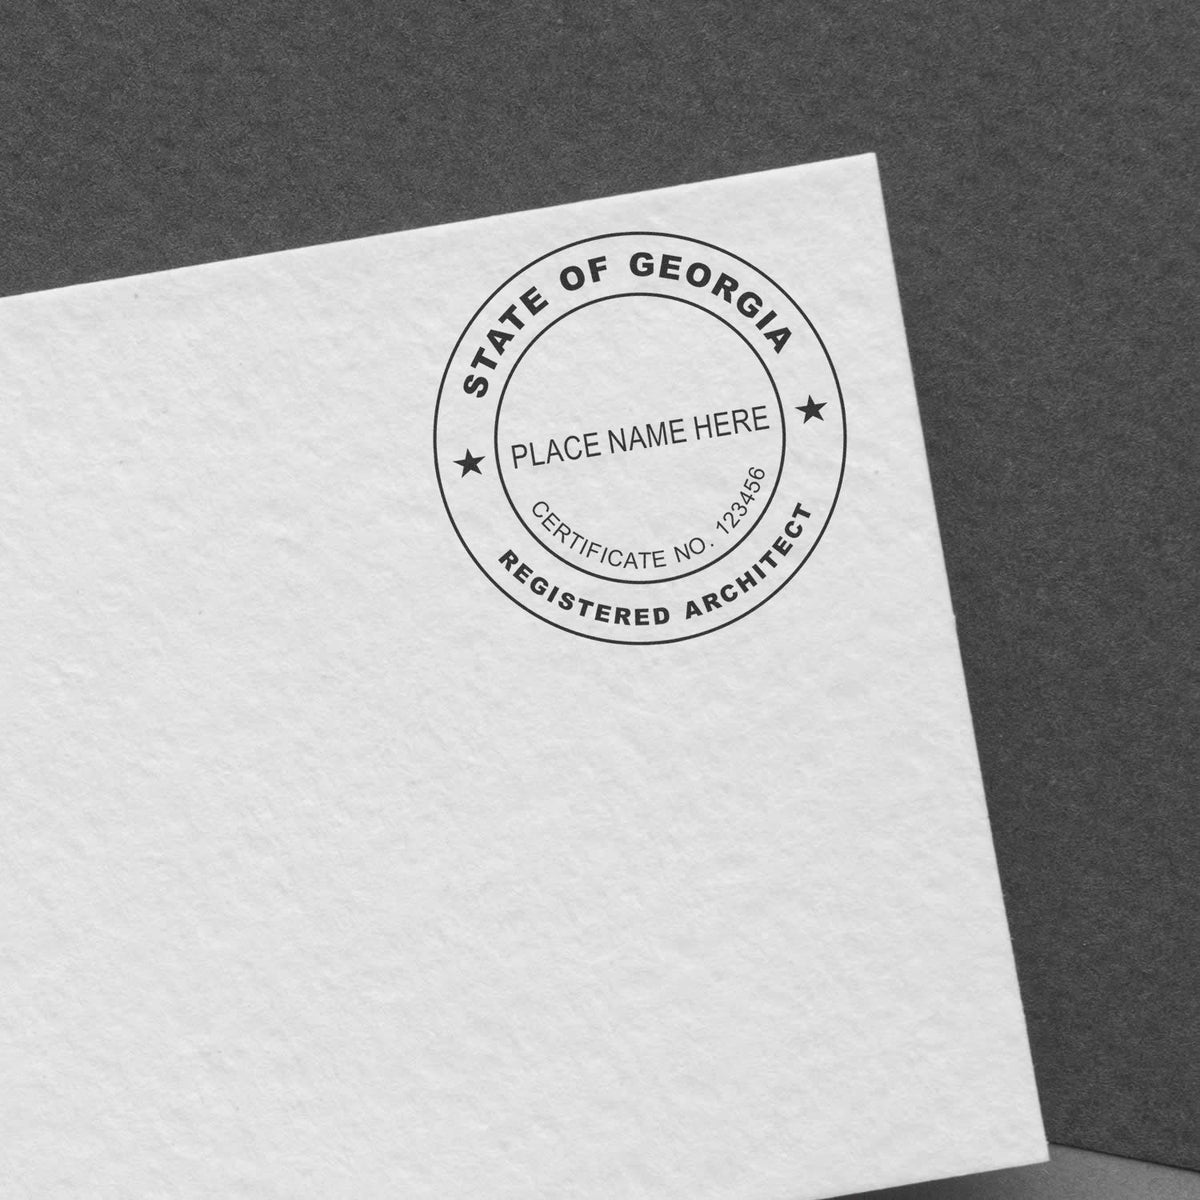 A stamped impression of the Slim Pre-Inked Georgia Architect Seal Stamp in this stylish lifestyle photo, setting the tone for a unique and personalized product.